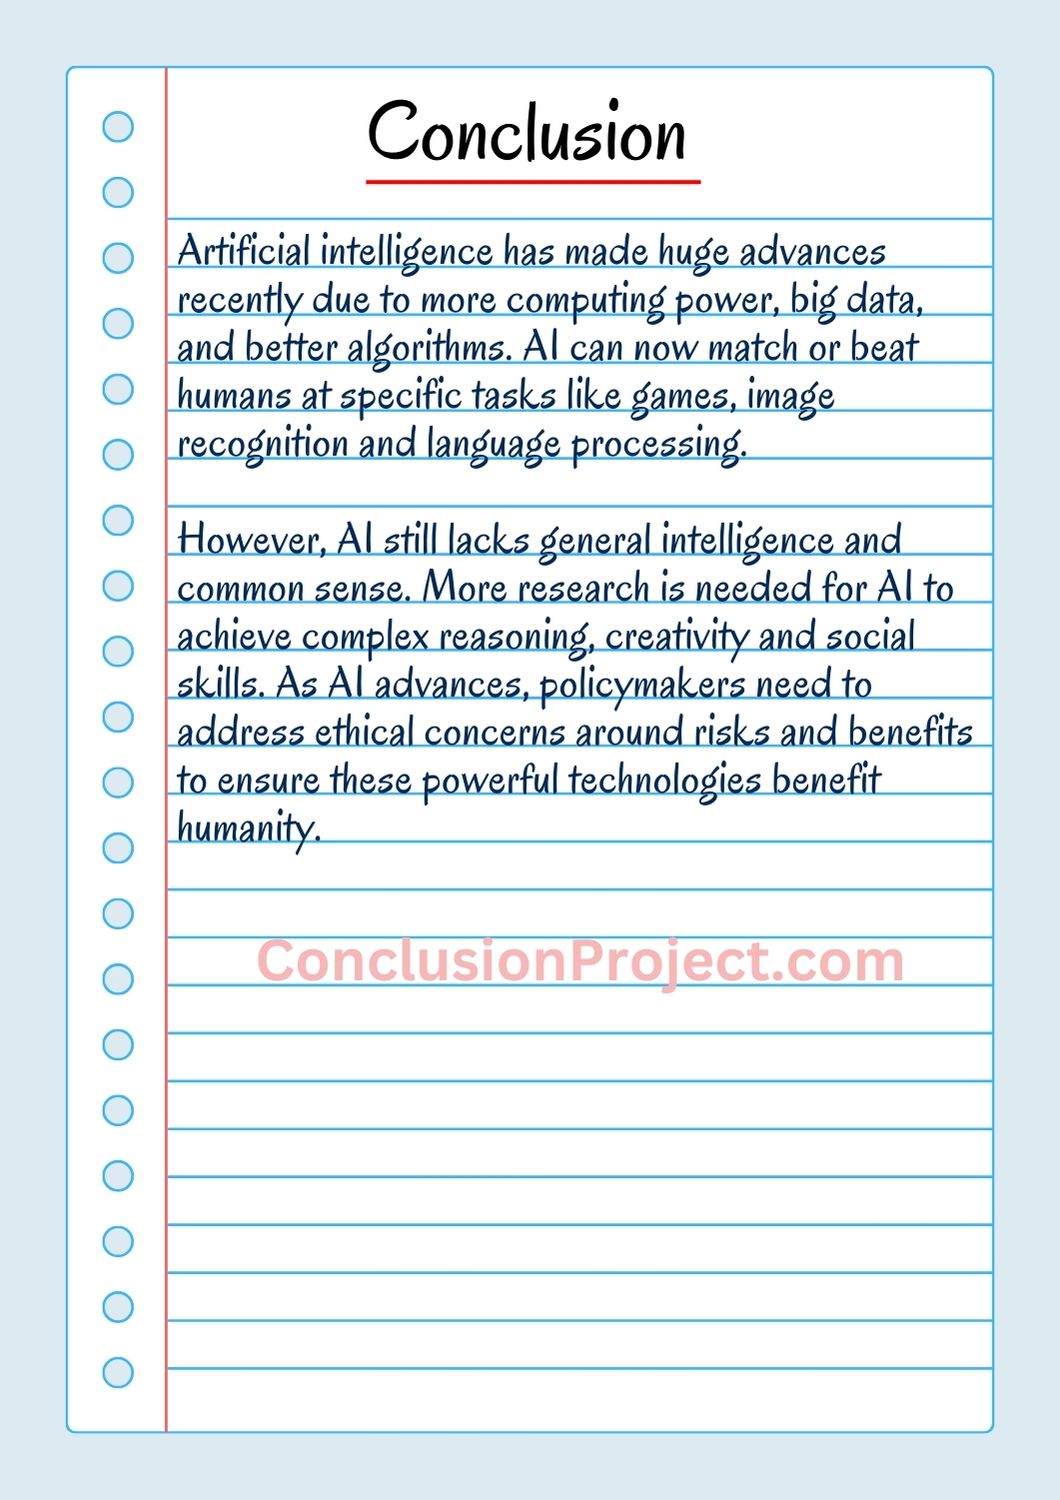 Conclusion of Artificial Intelligence